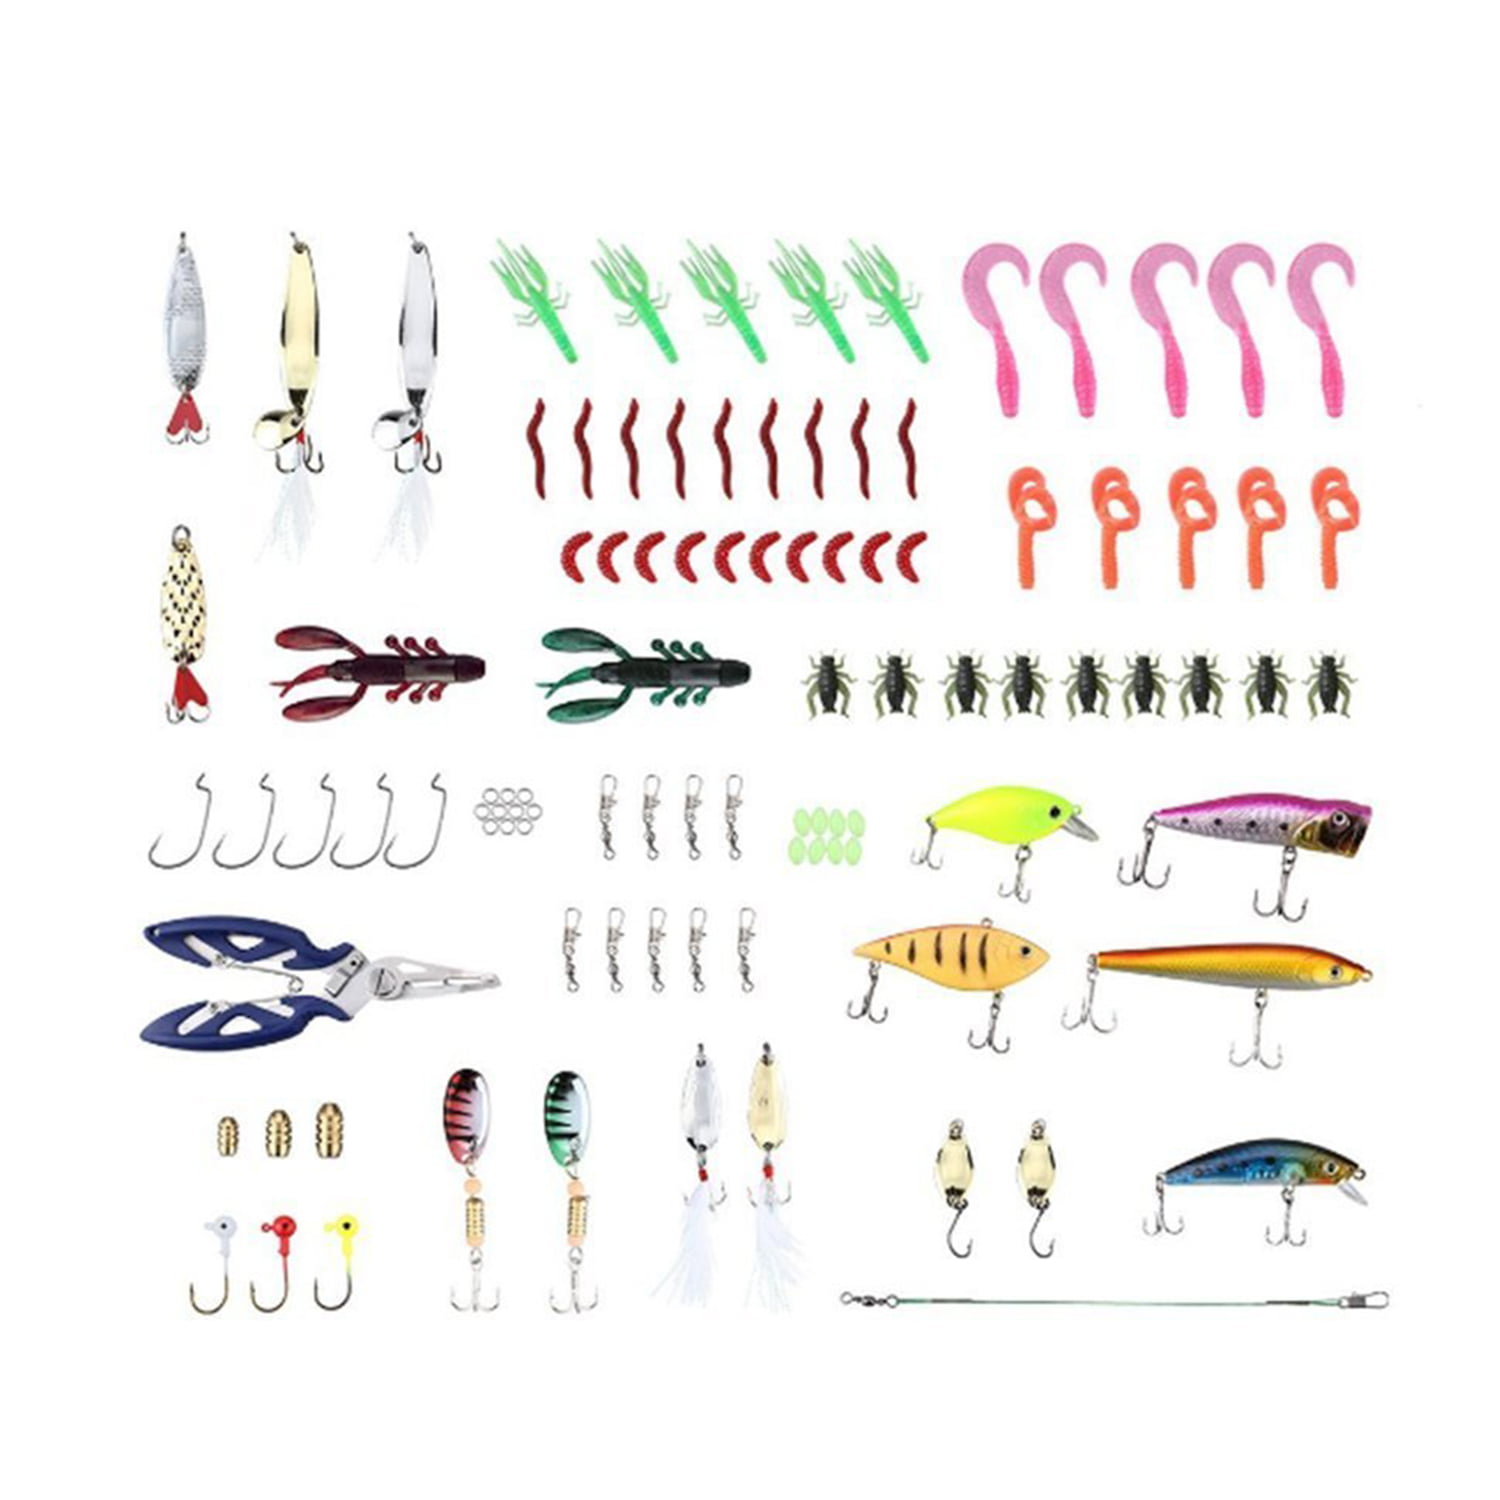 Gavol Fishing Lures Kit Fishing Baits Tackle Box with Tackle Included Frog  Lures Fishing Spoons Saltwater Pencil Bait Grasshopper Lures for Bass Trout